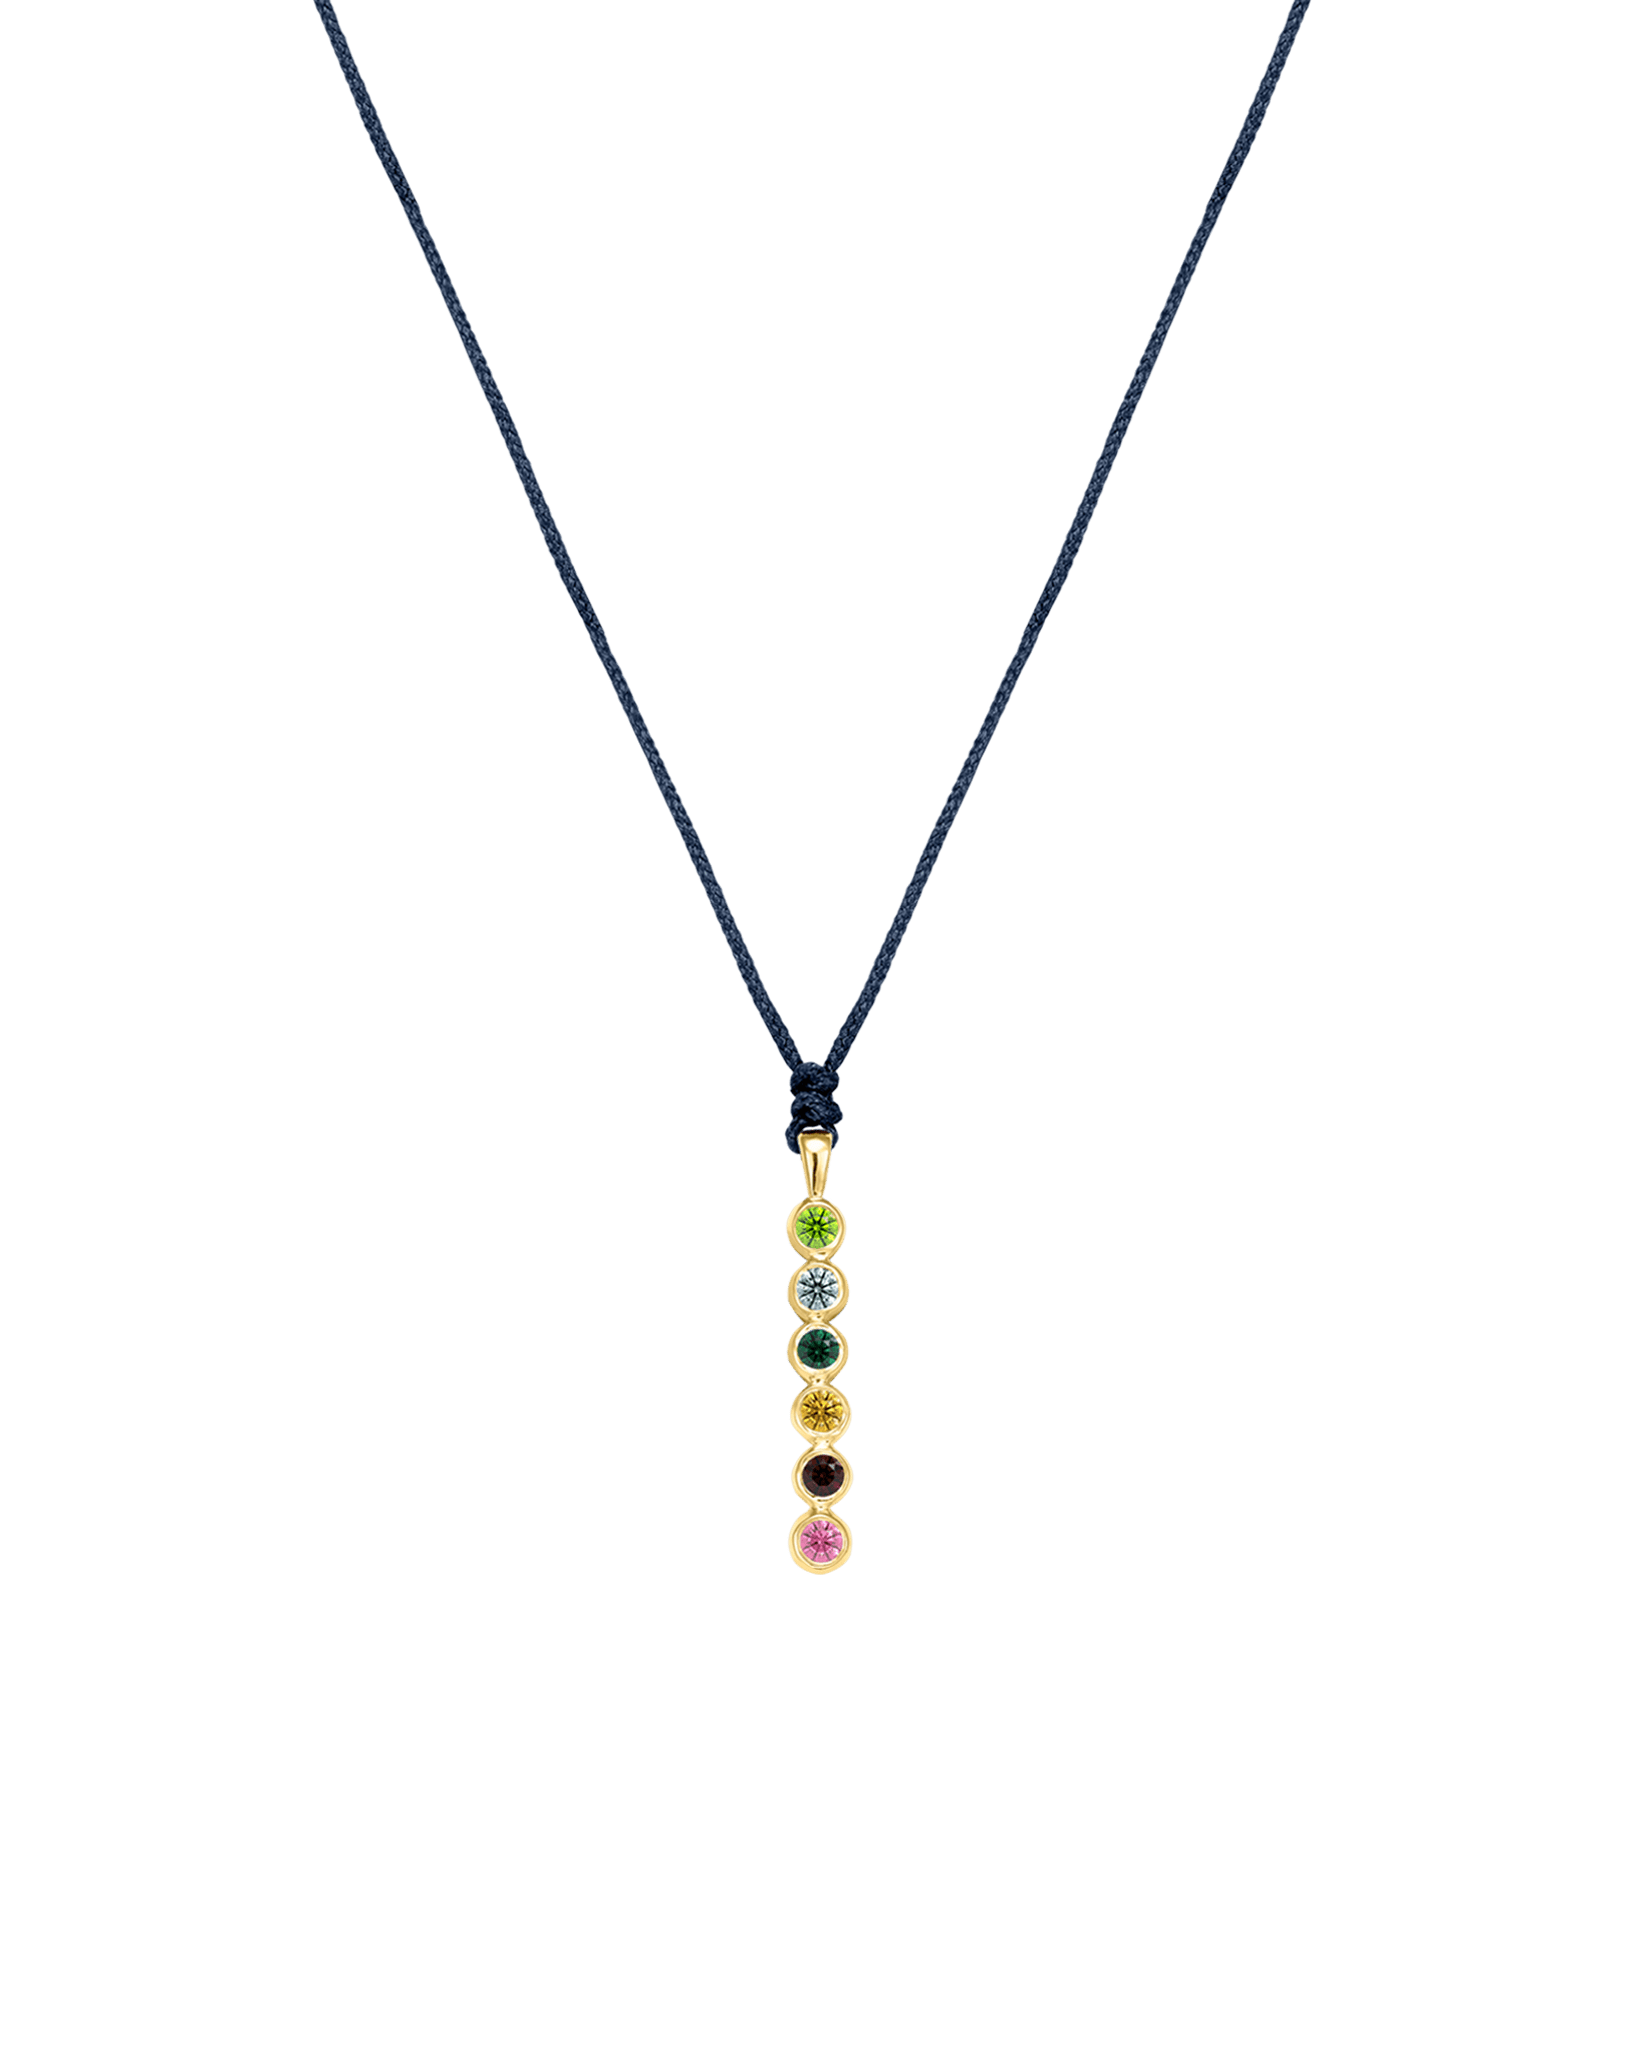 The Birthstones Bar Necklace - 14K Yellow Gold Necklaces 14K Solid Gold Navy Blue 2 